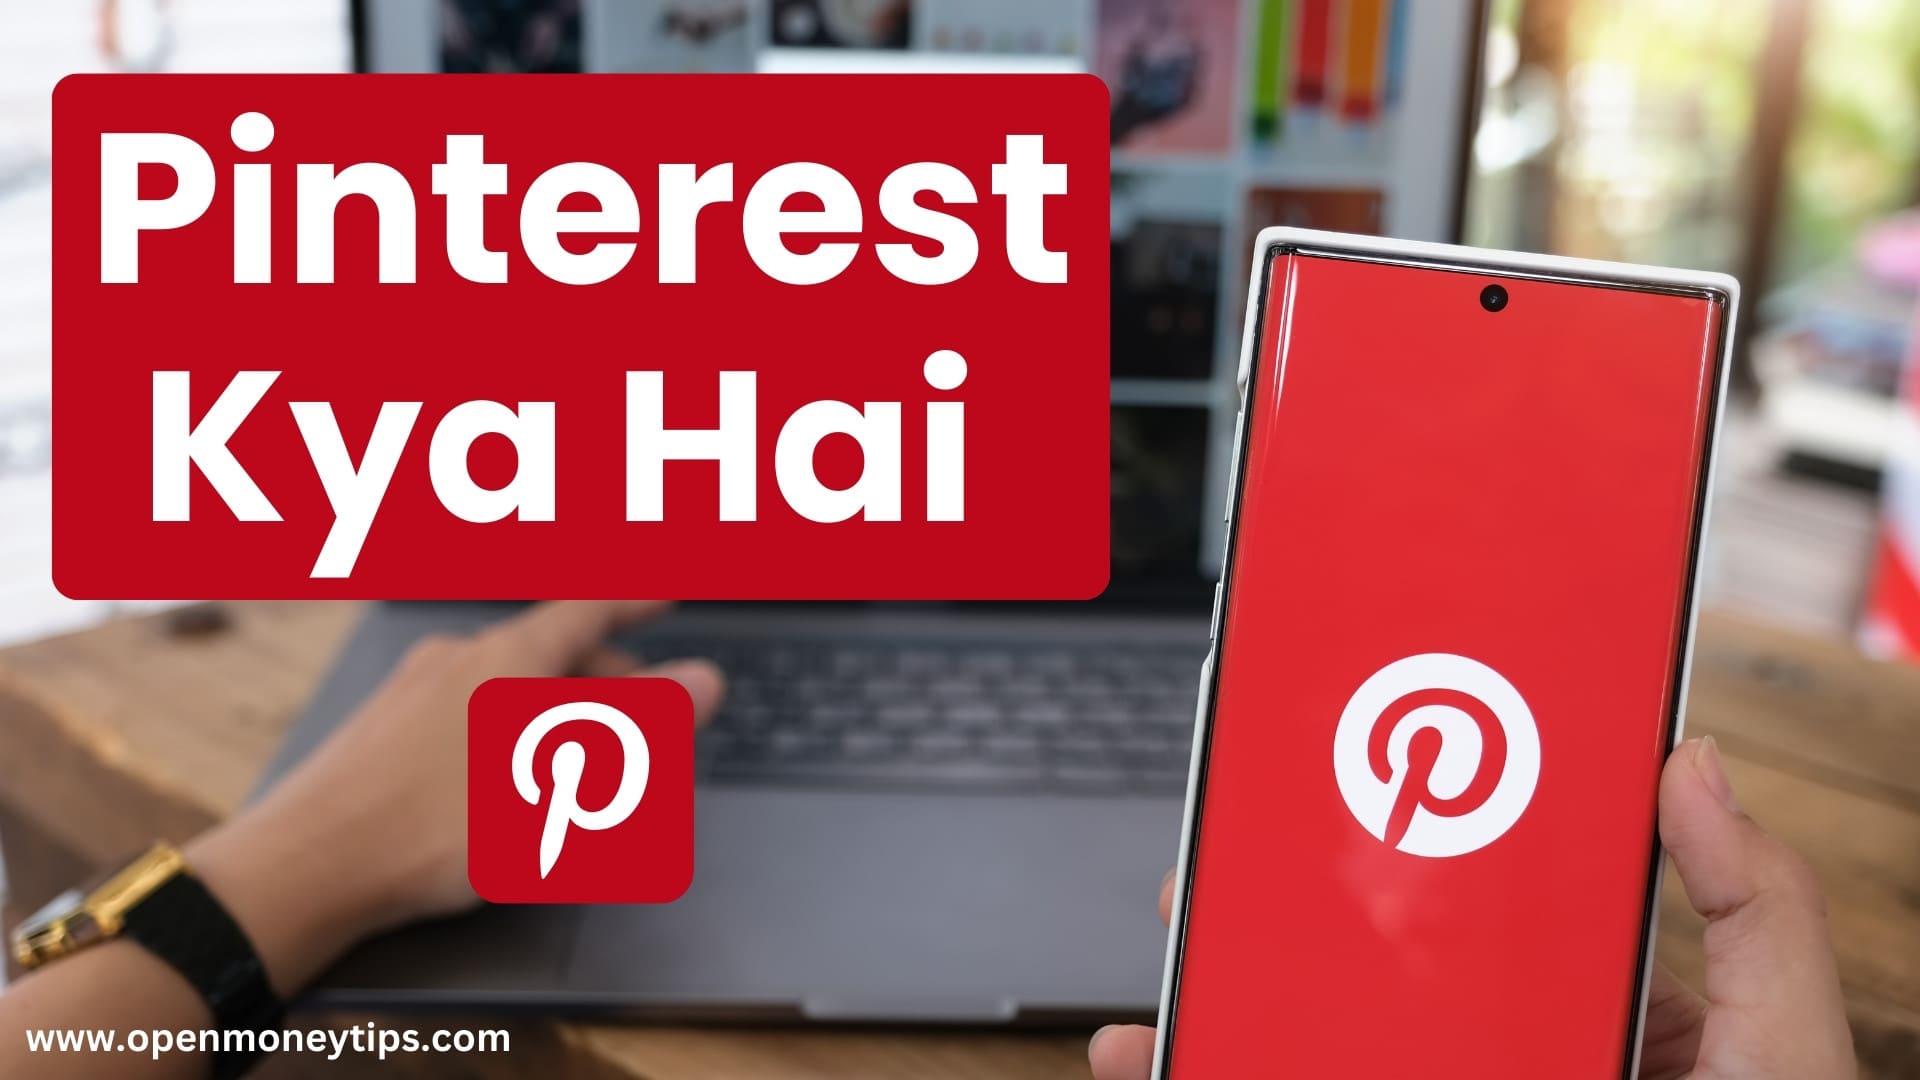 Pinterest meaning in hindi